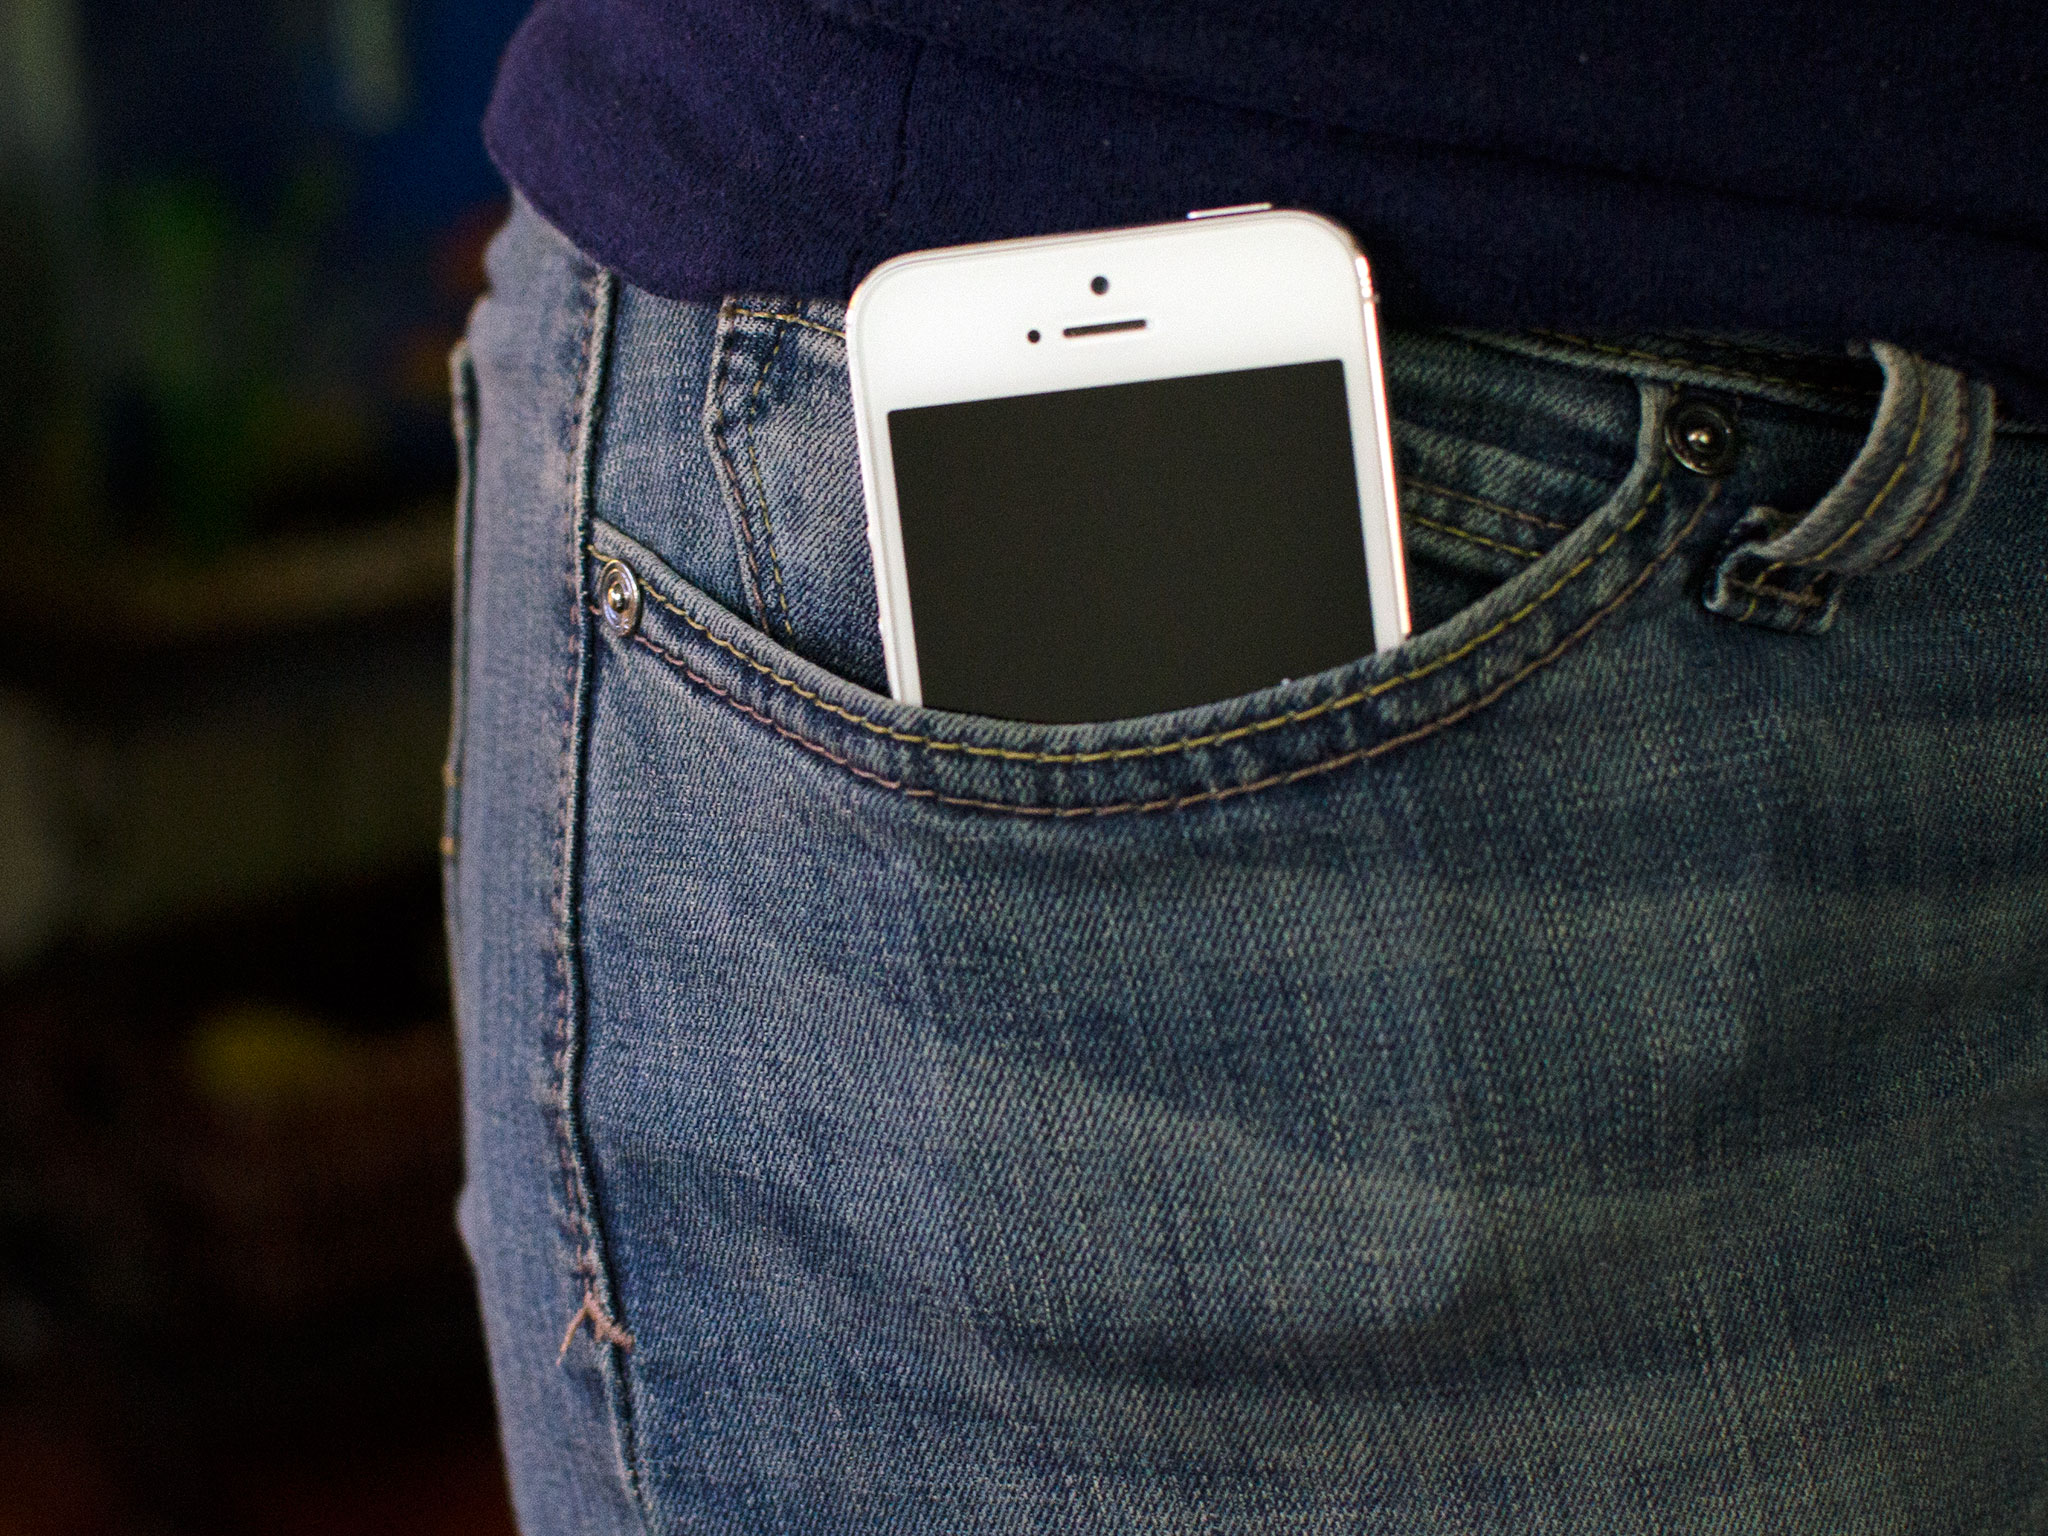 iPhone 5s front pocket view - upright